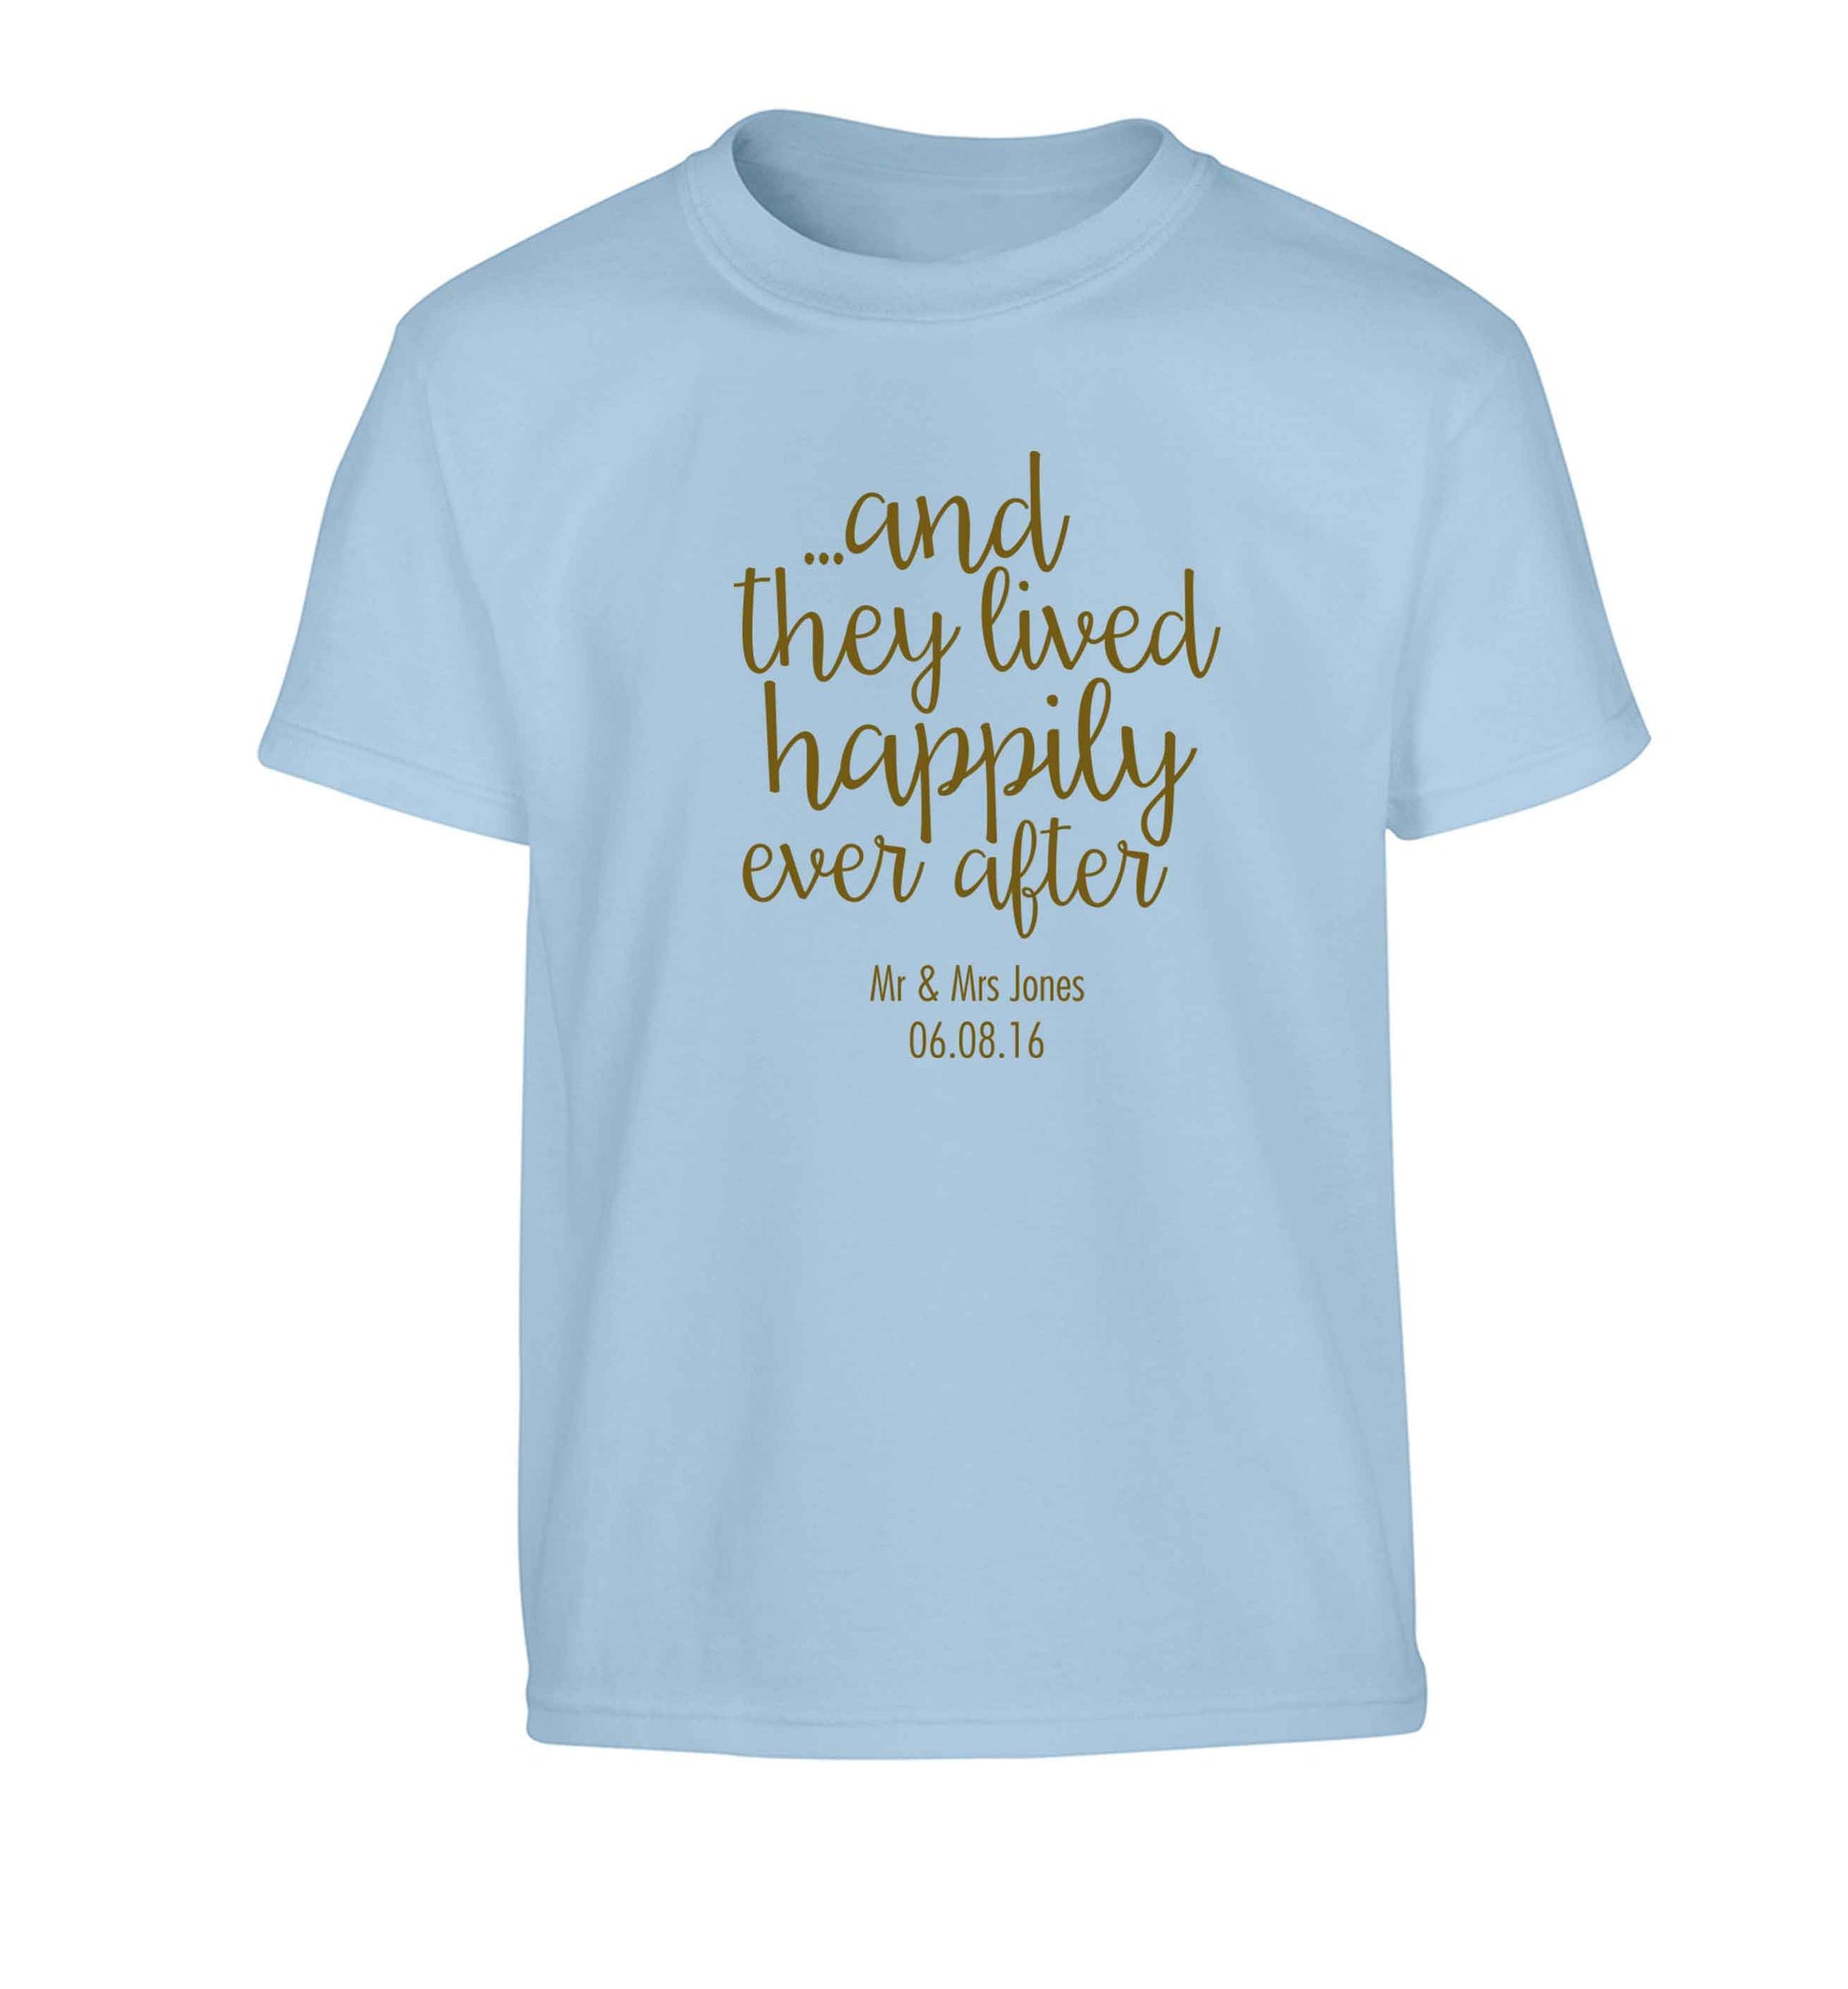 ...and they lived happily ever after - personalised date and names Children's light blue Tshirt 12-13 Years